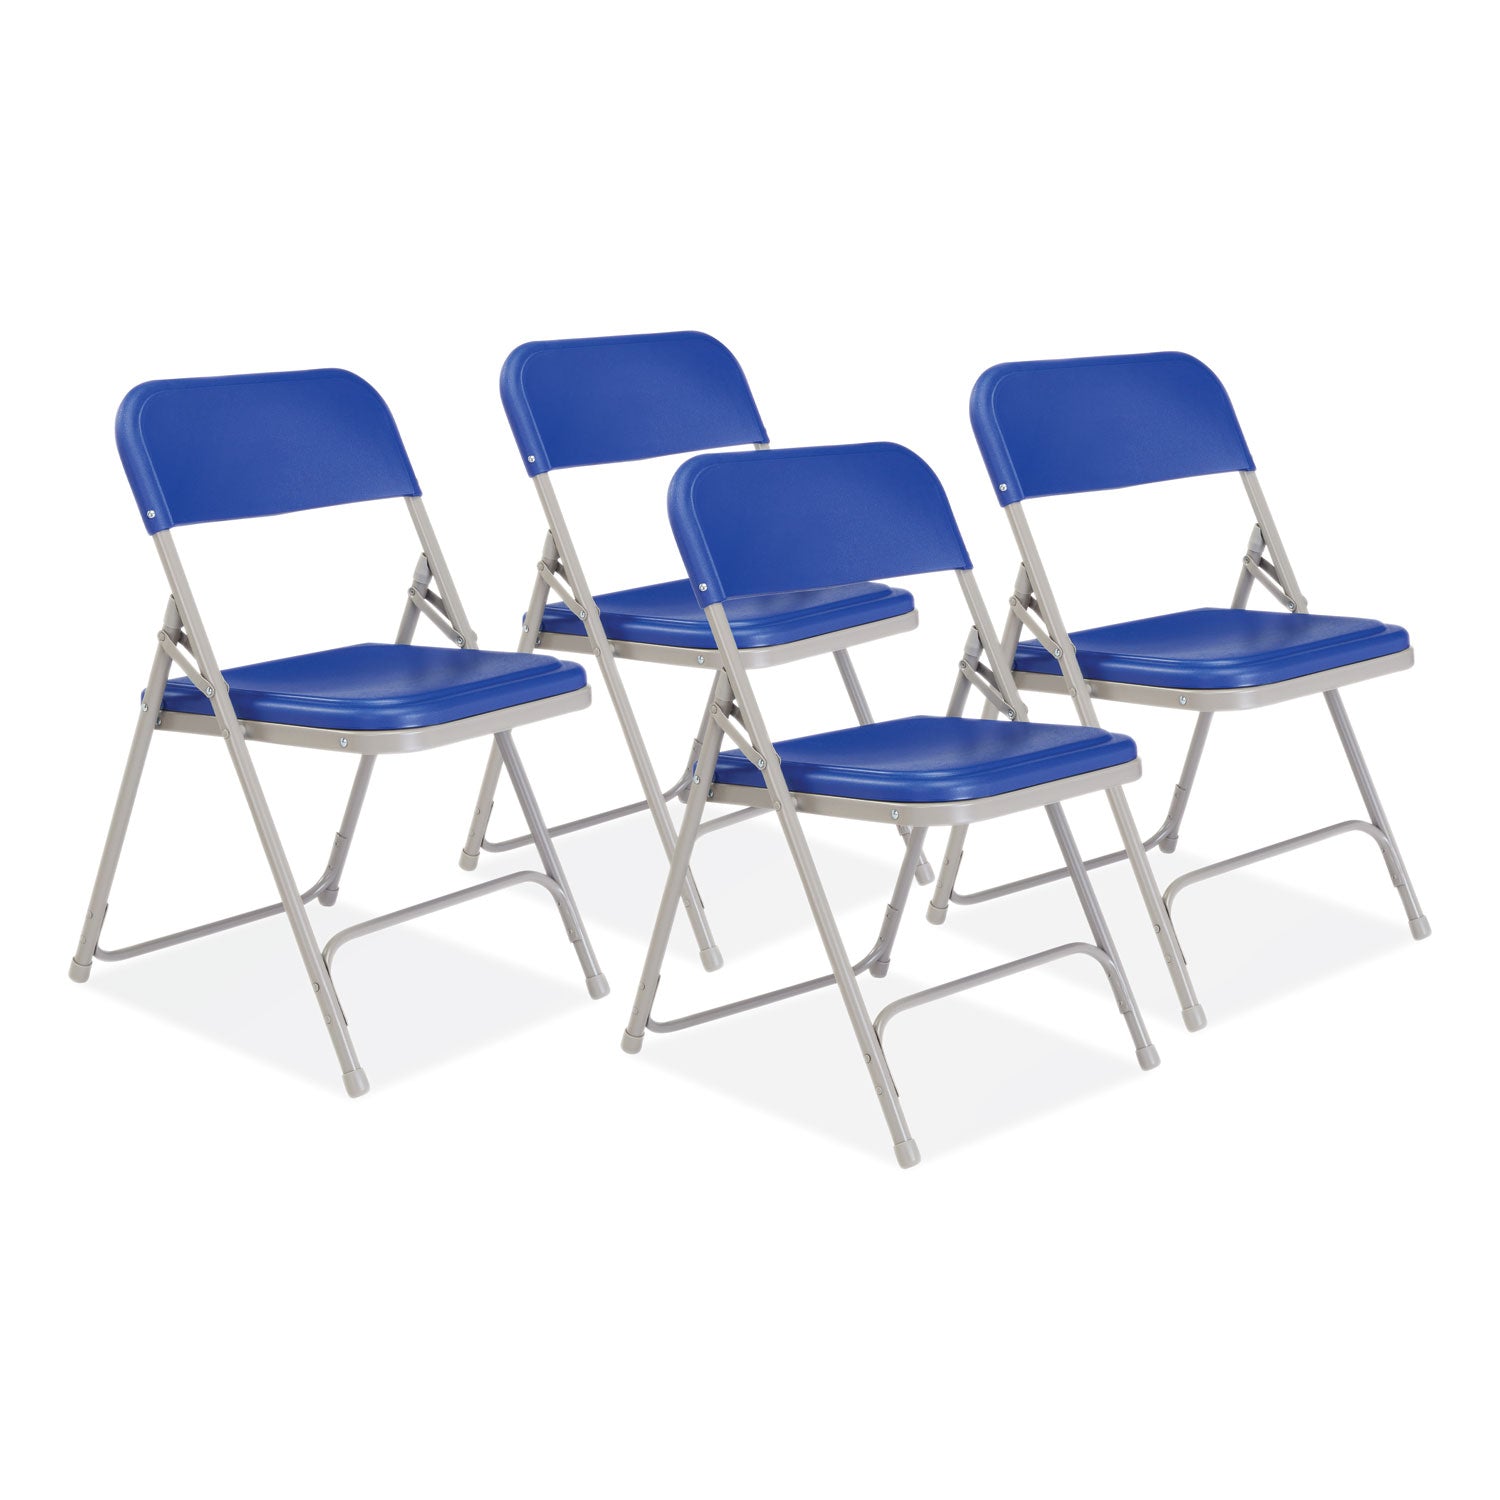 800-series-premium-plastic-folding-chair-supports-500-lb-18-seat-ht-blue-seat-back-gray-base-4-ctships-in-1-3-bus-days_nps805 - 1